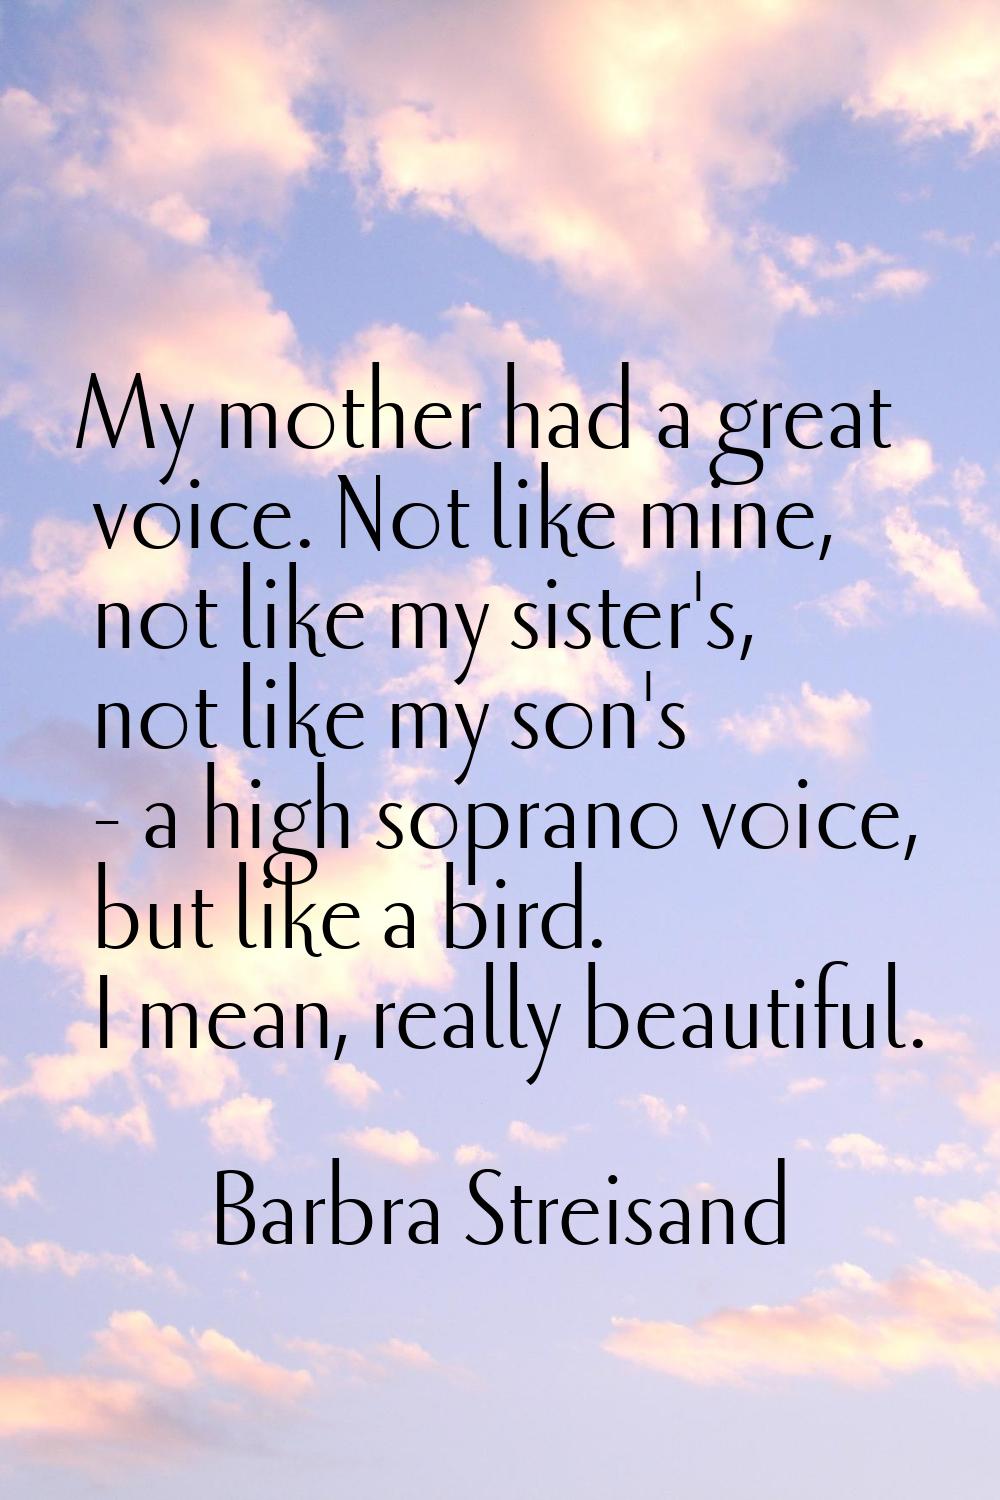 My mother had a great voice. Not like mine, not like my sister's, not like my son's - a high sopran